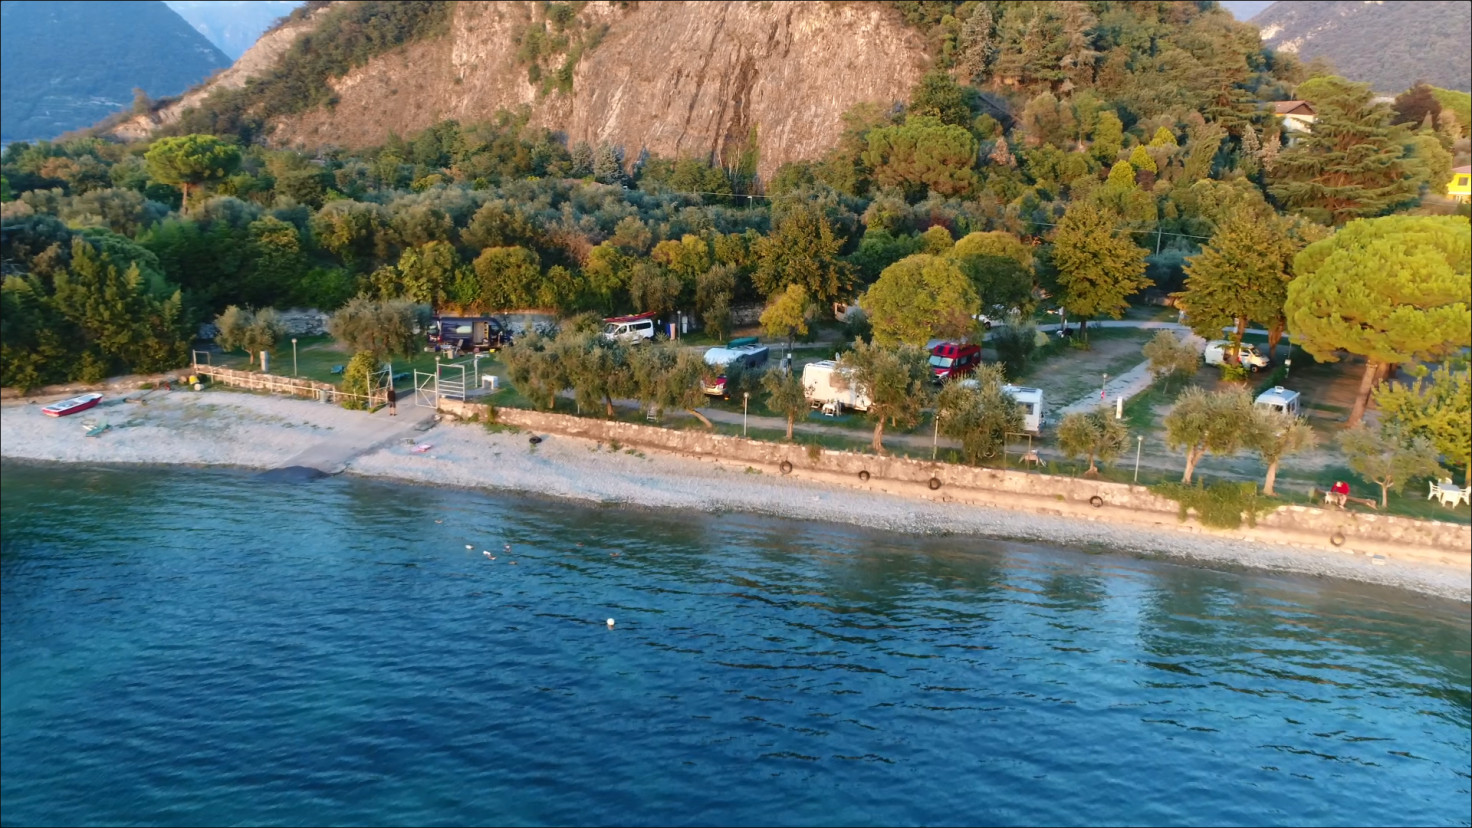 Photo of Spiaggia libera Pilzone - popular place among relax connoisseurs